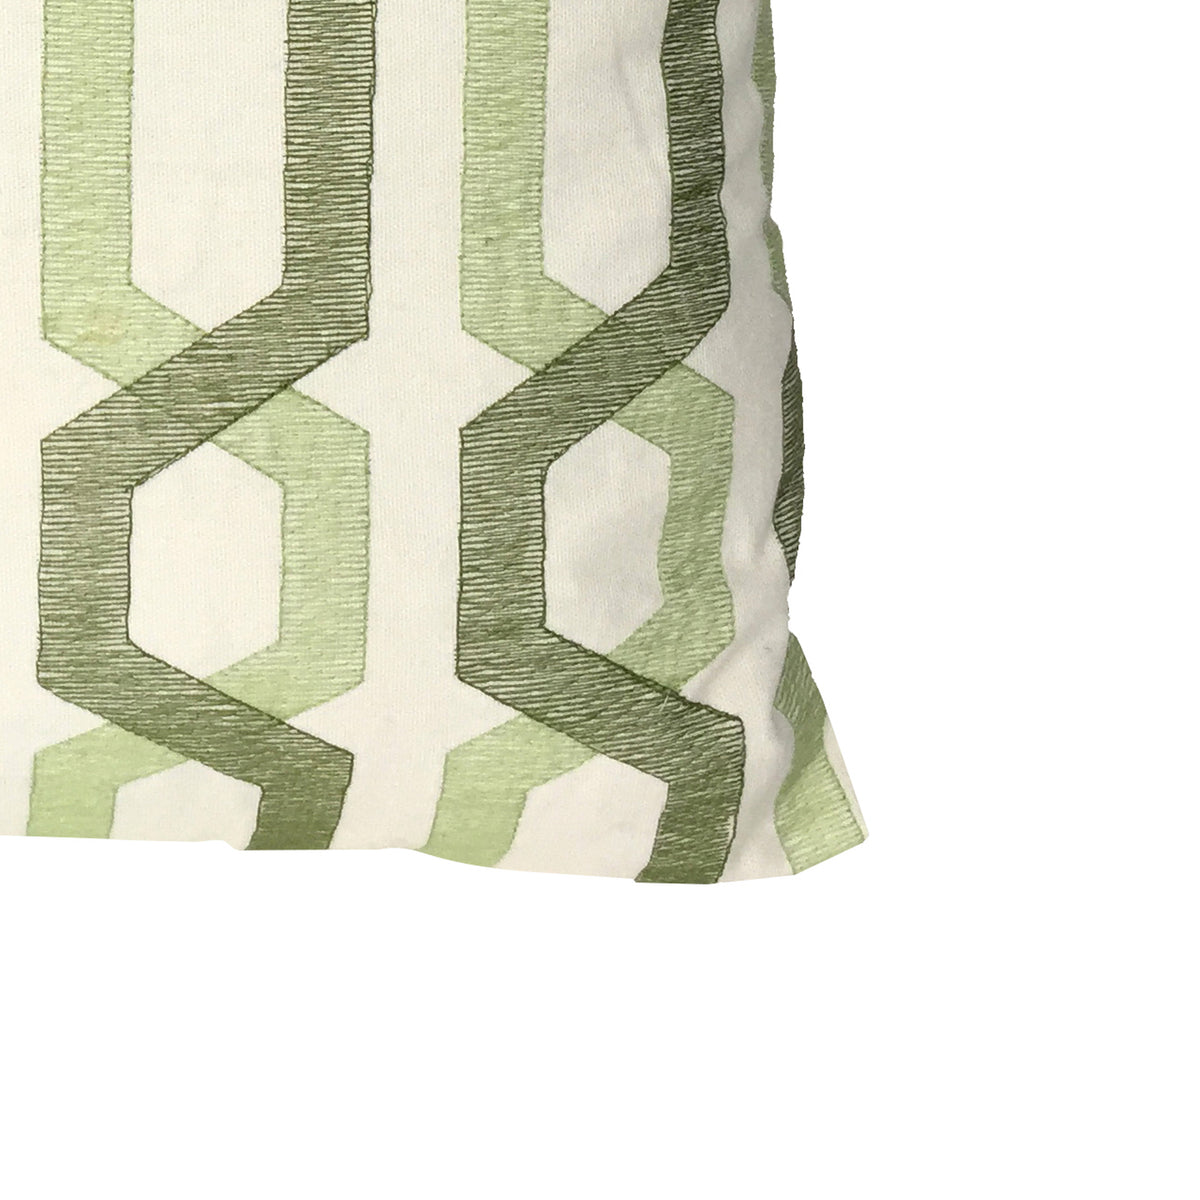 Contemporary Cotton Pillow with Geometric Embroidery, White and Green - BM200583